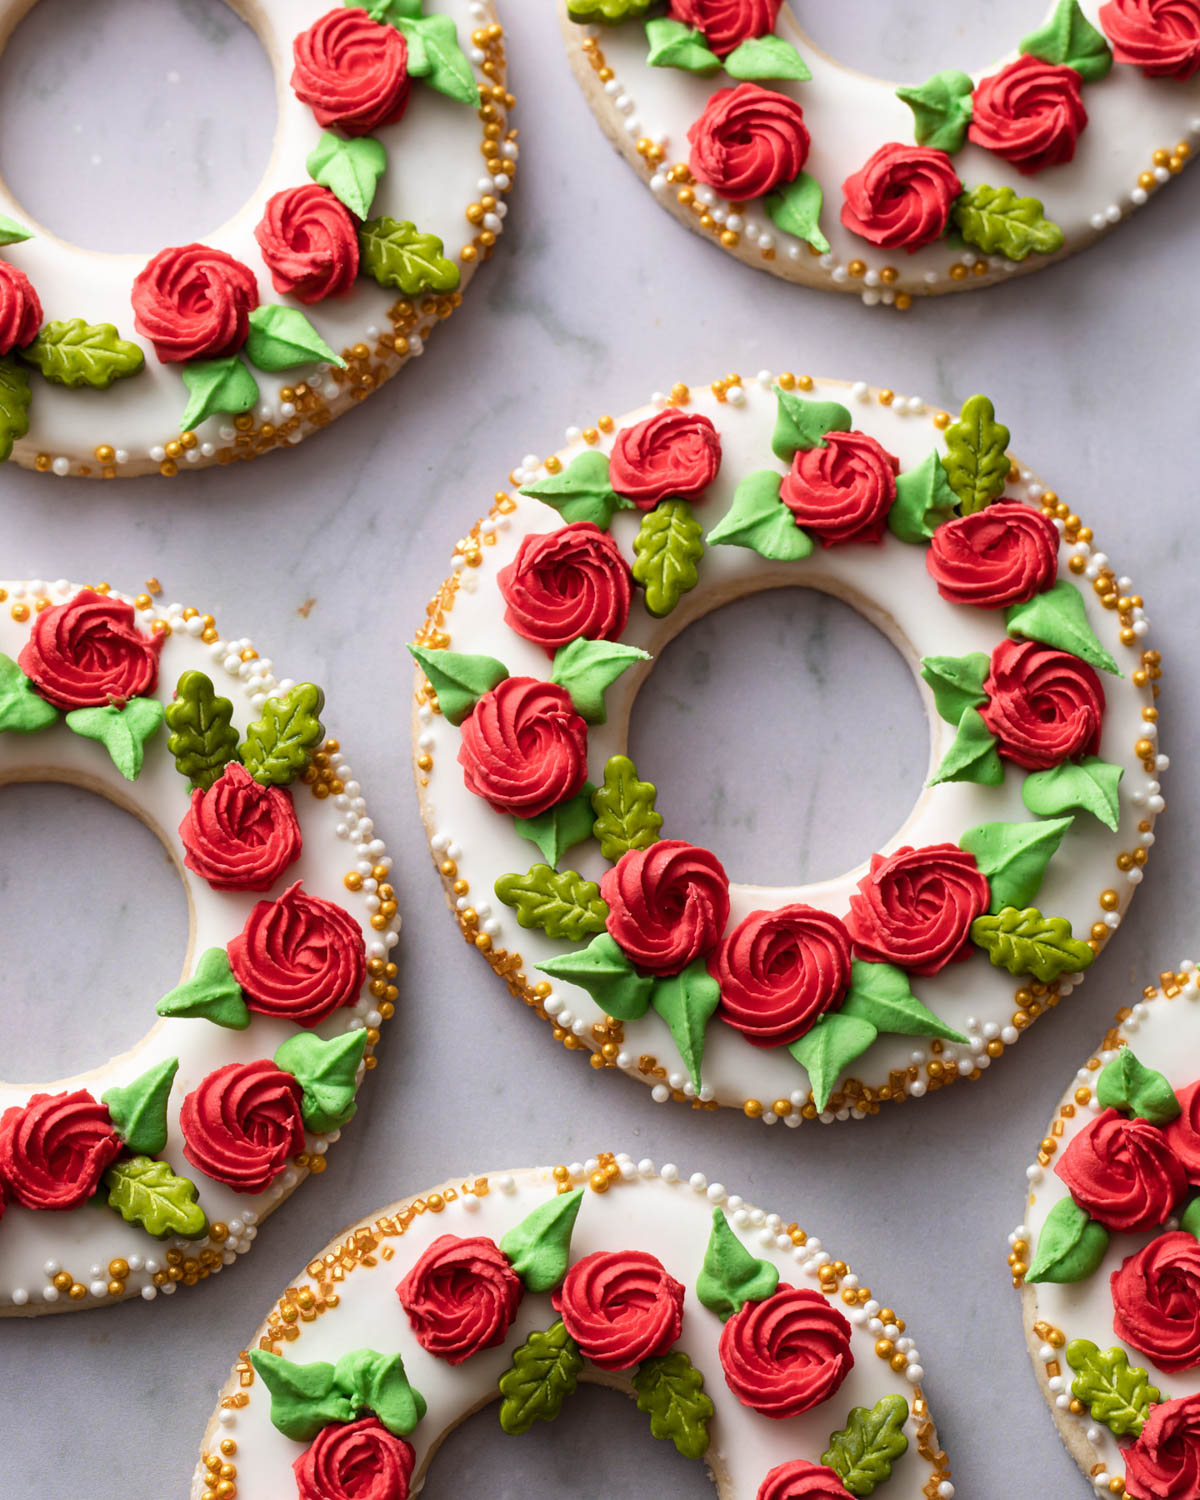 A close-up image of wreath sugar cookies with piped red rosettes